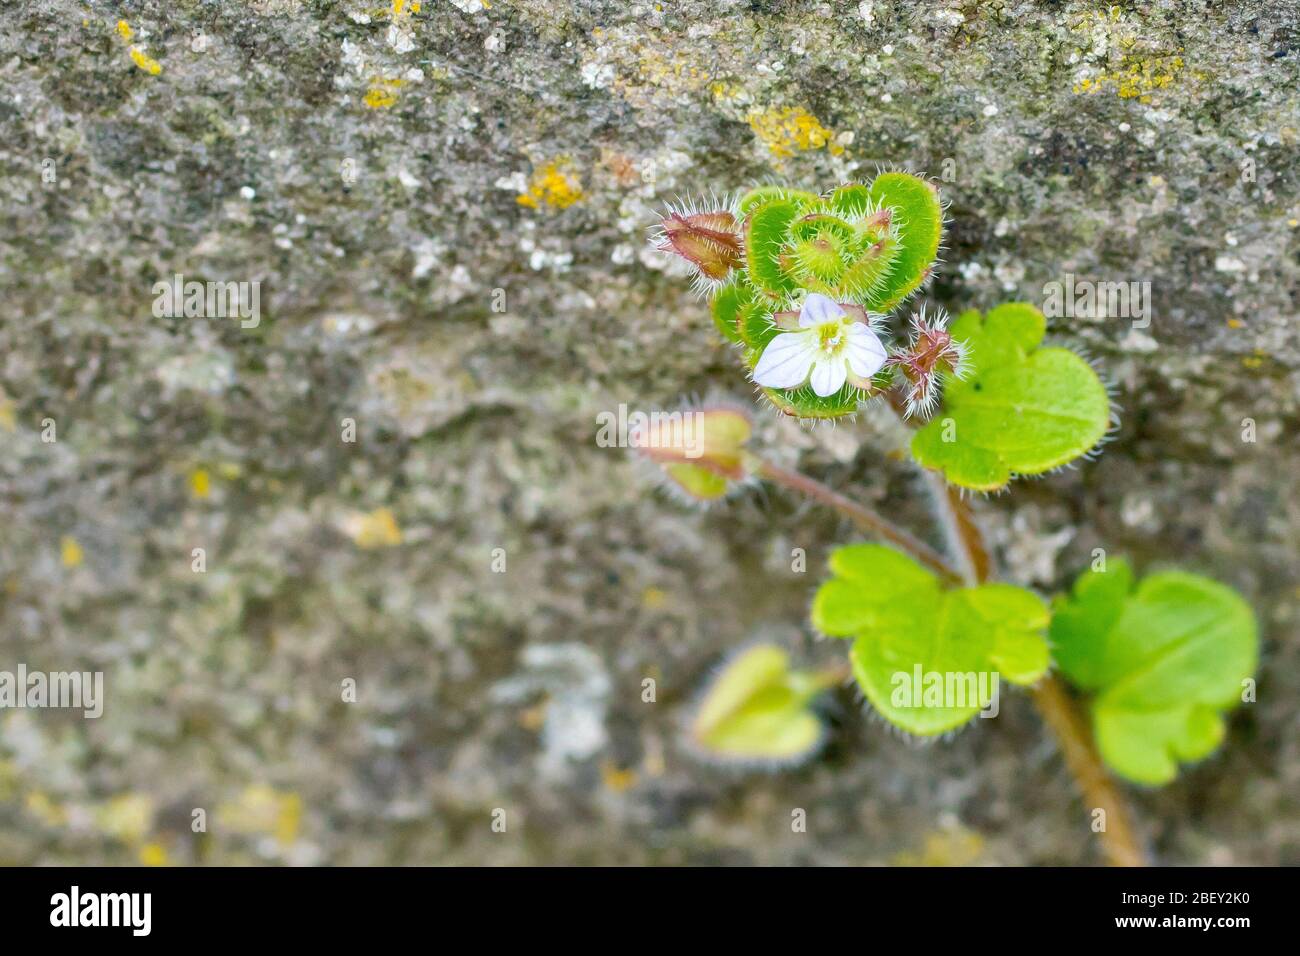 Ivy-leaved Speedwell (veronica hederifolia), close up of several flowering plants growing from the edge of the pavement and up a stone wall. Stock Photo